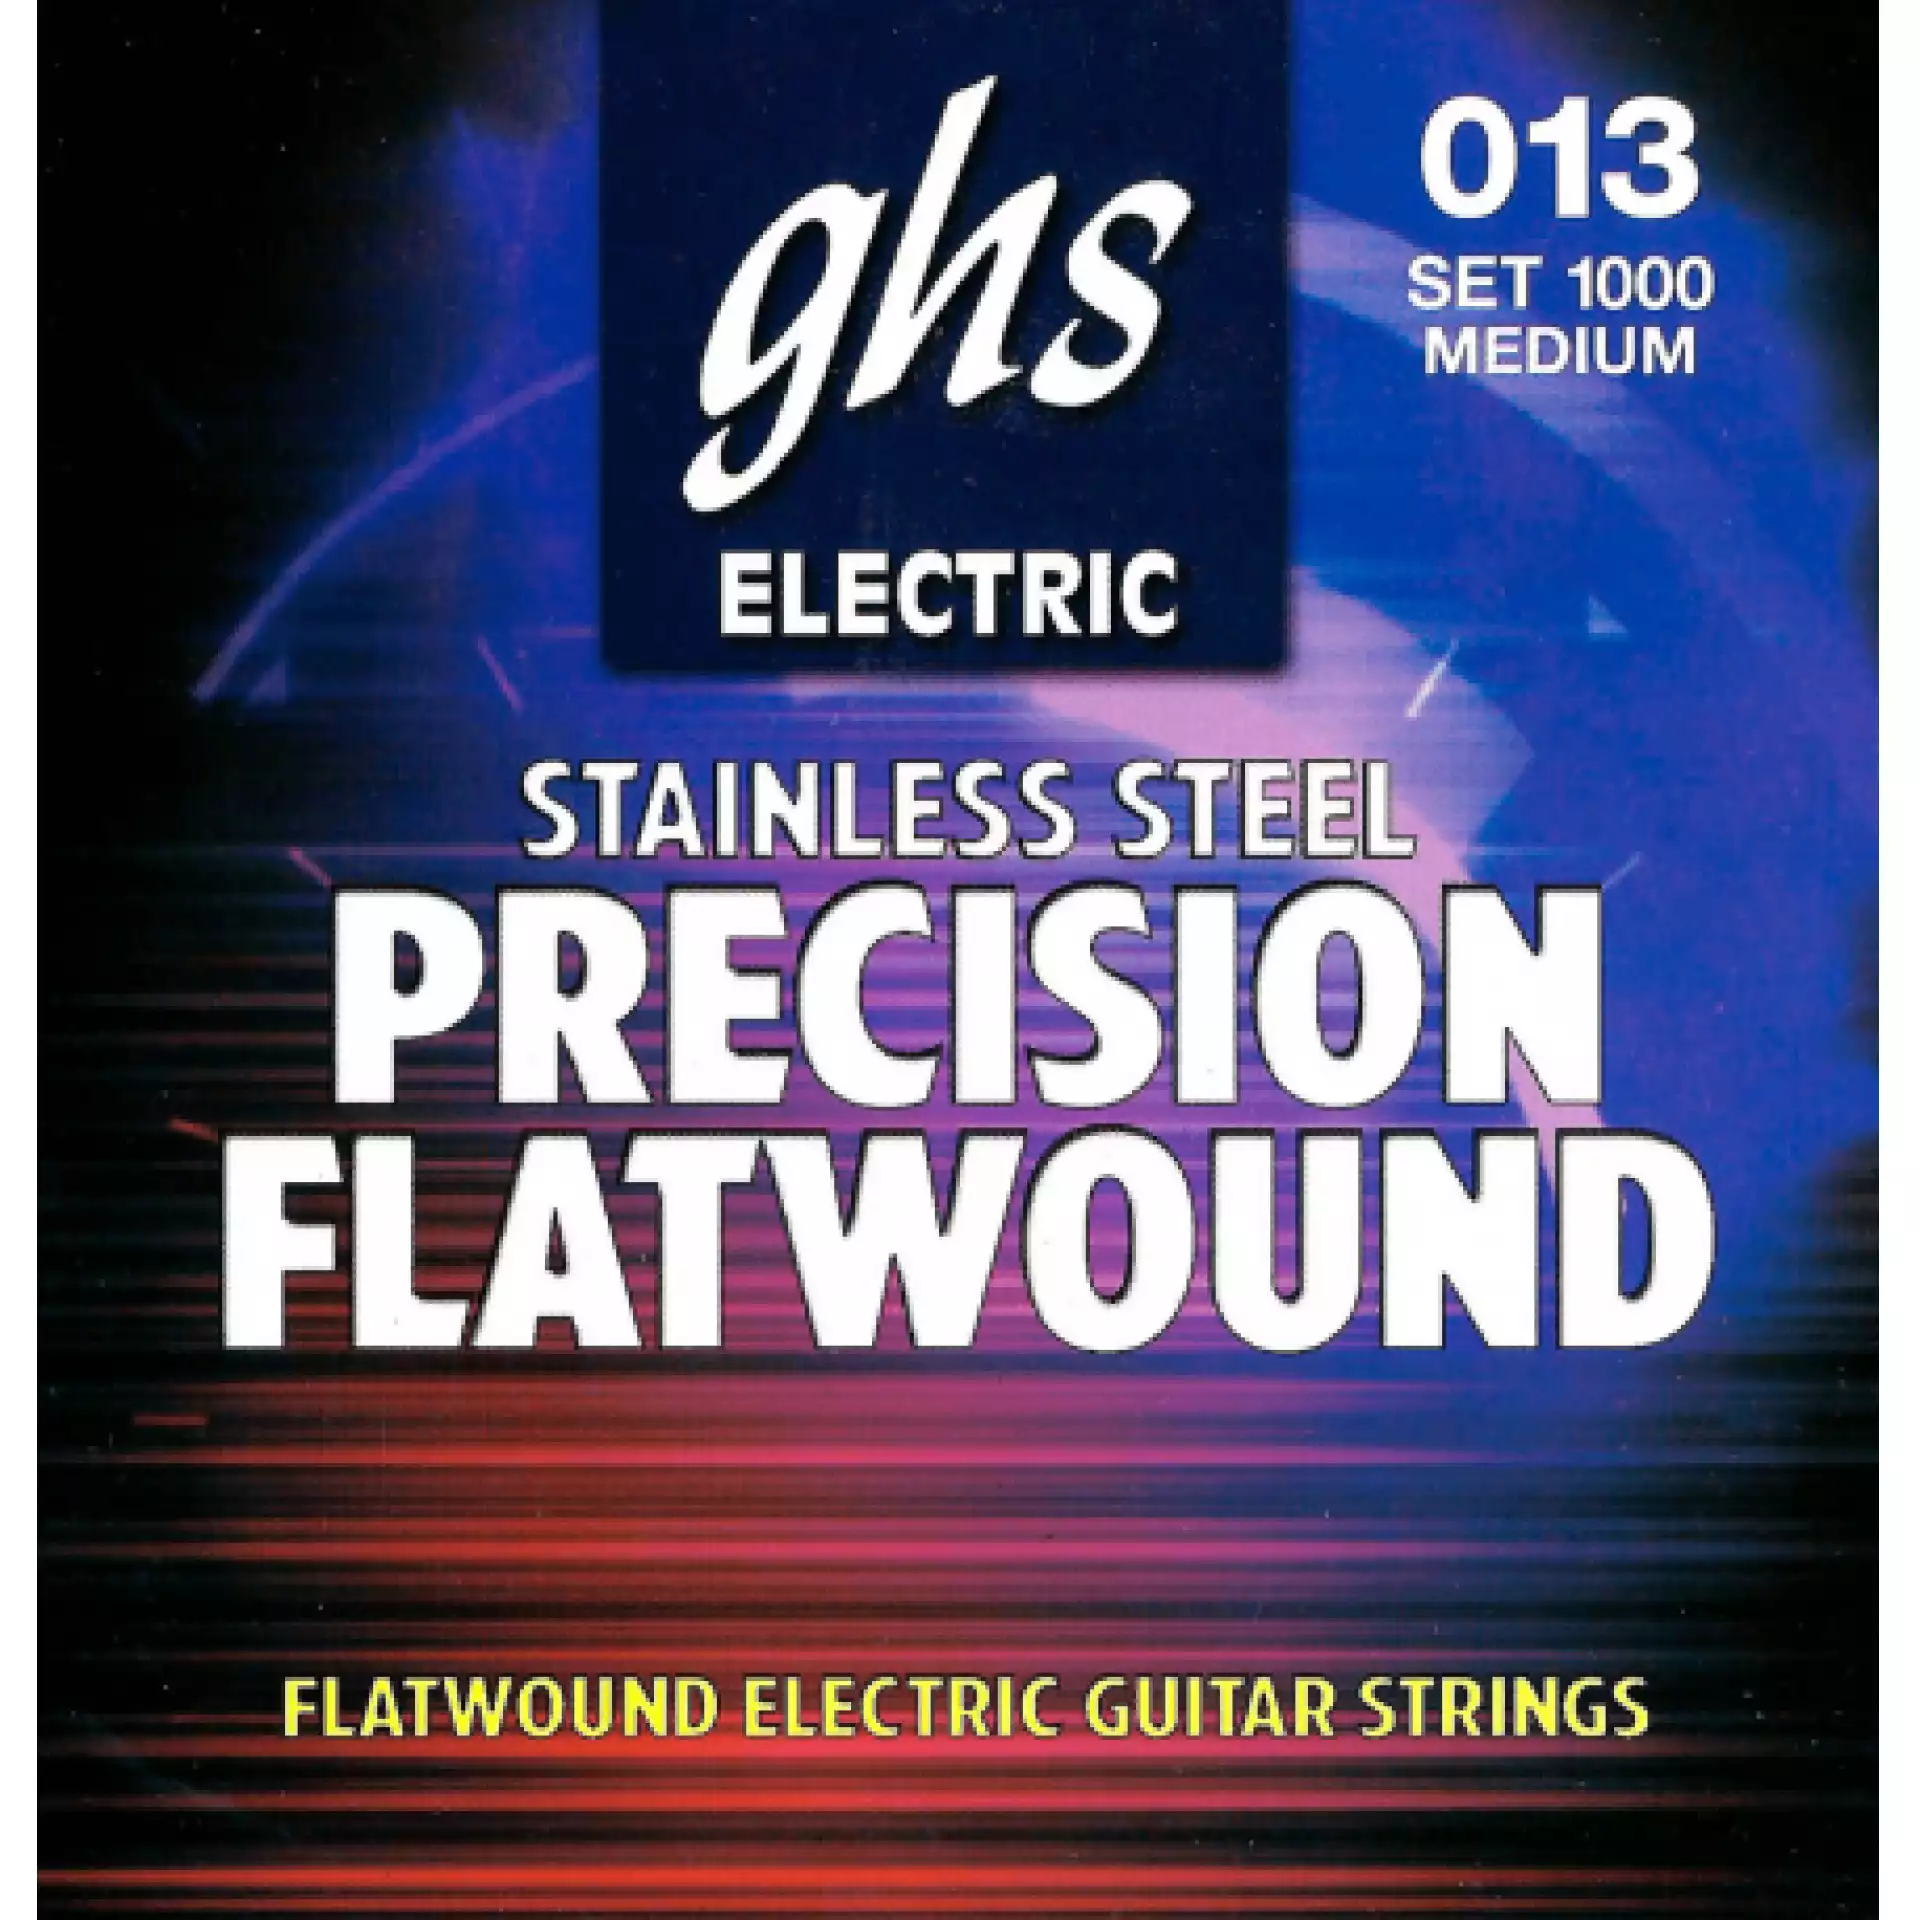 GHS 1000 Precision Flatwound Flat Wrap Stainless Steel